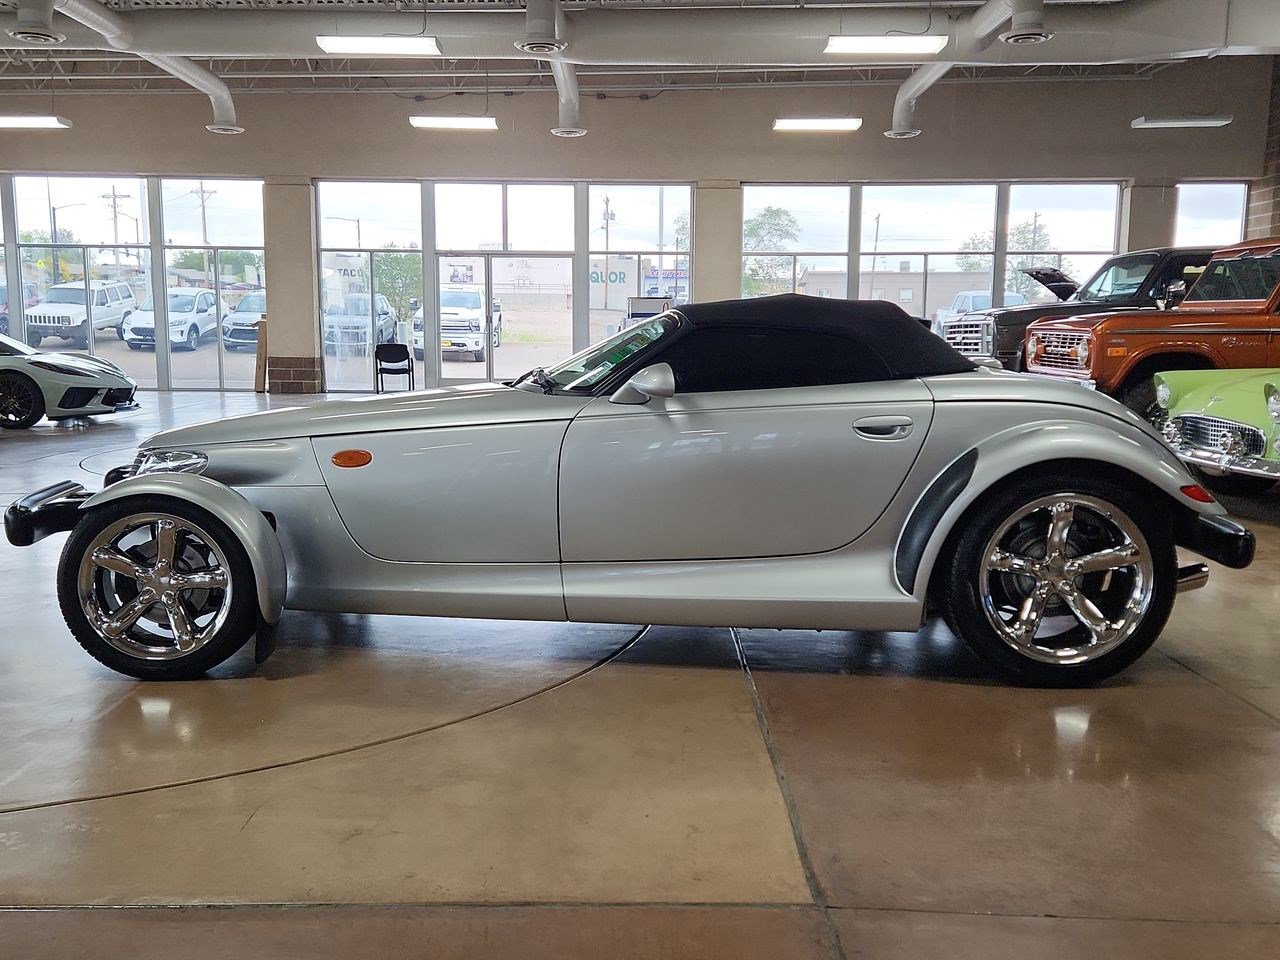 Used 2001 Plymouth Prowler  with VIN 1P3EW65G71V700258 for sale in Pueblo, CO